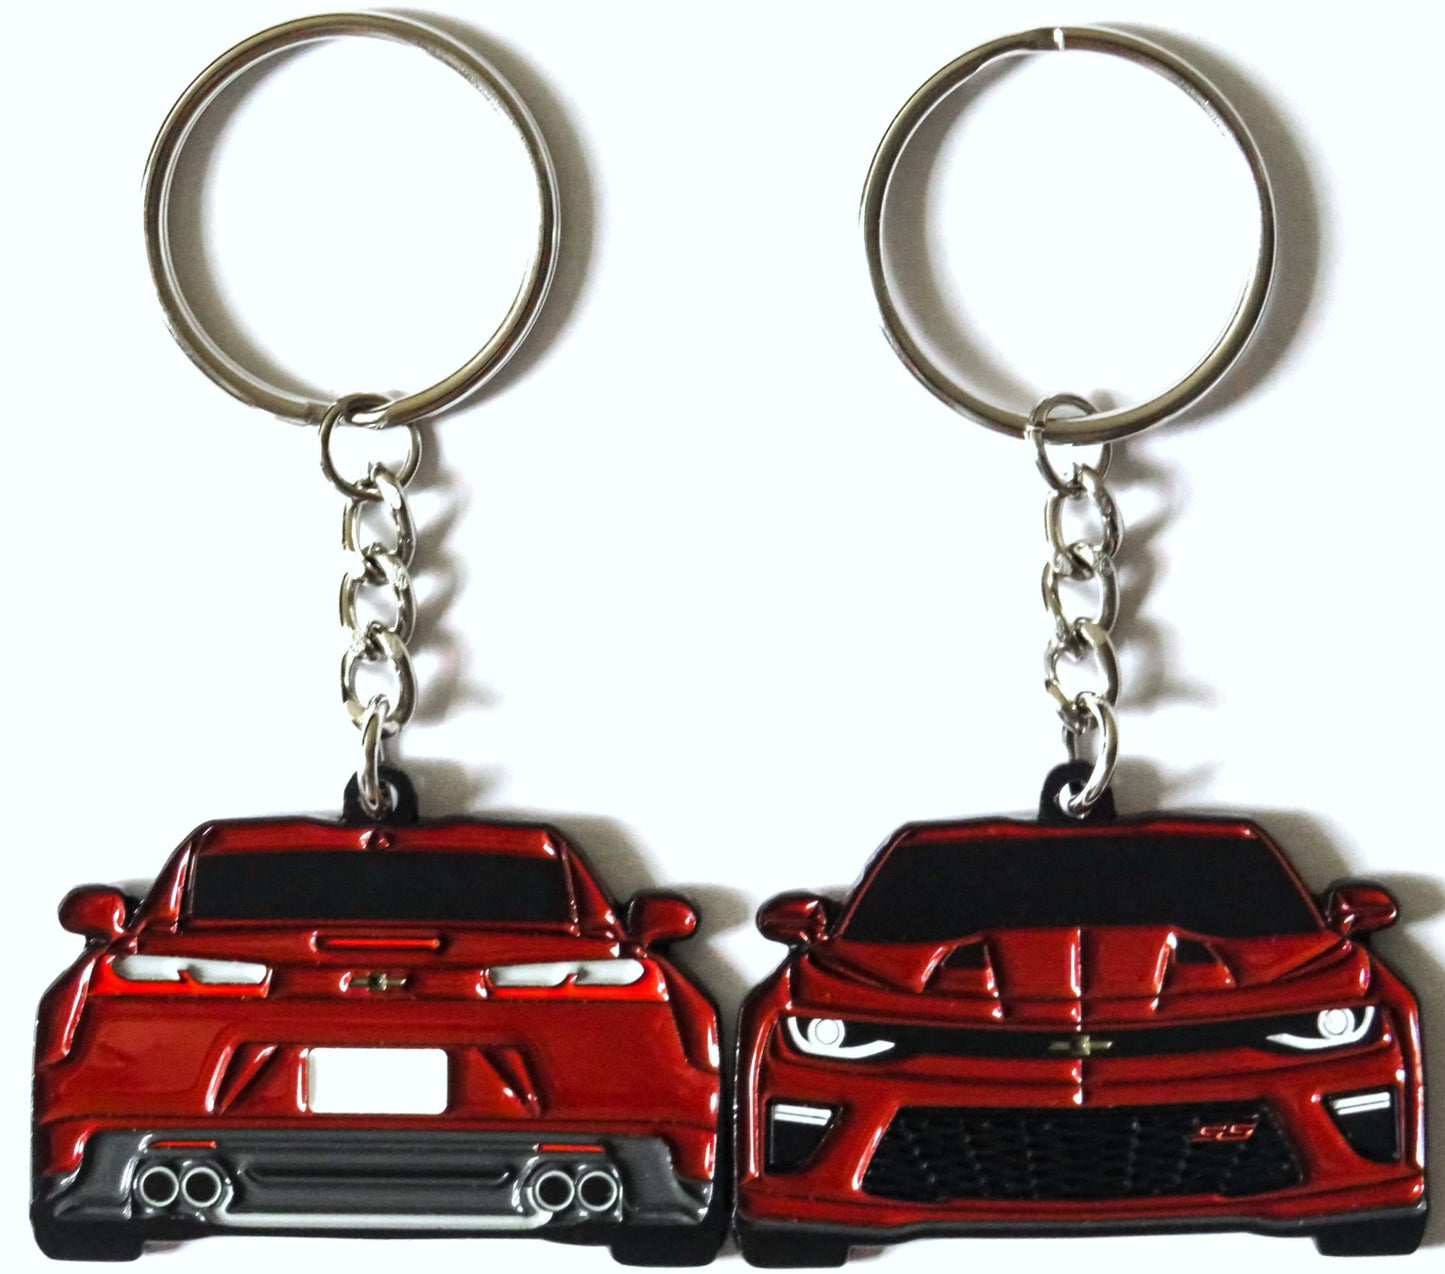 Enamel Keychain Pin Lanyard that fits on a key fob cover For 2016 2017 2018 Garnet Red Chevy Camaro SS RS ZL1 1LE Sixth Generation 6th Gen American muscle car accessories, jet tag, key ring gift ideas for car guys, car enthusiasts, gearheads, father, mother, dad, mom, him, her, boyfriend, girlfriend and more.